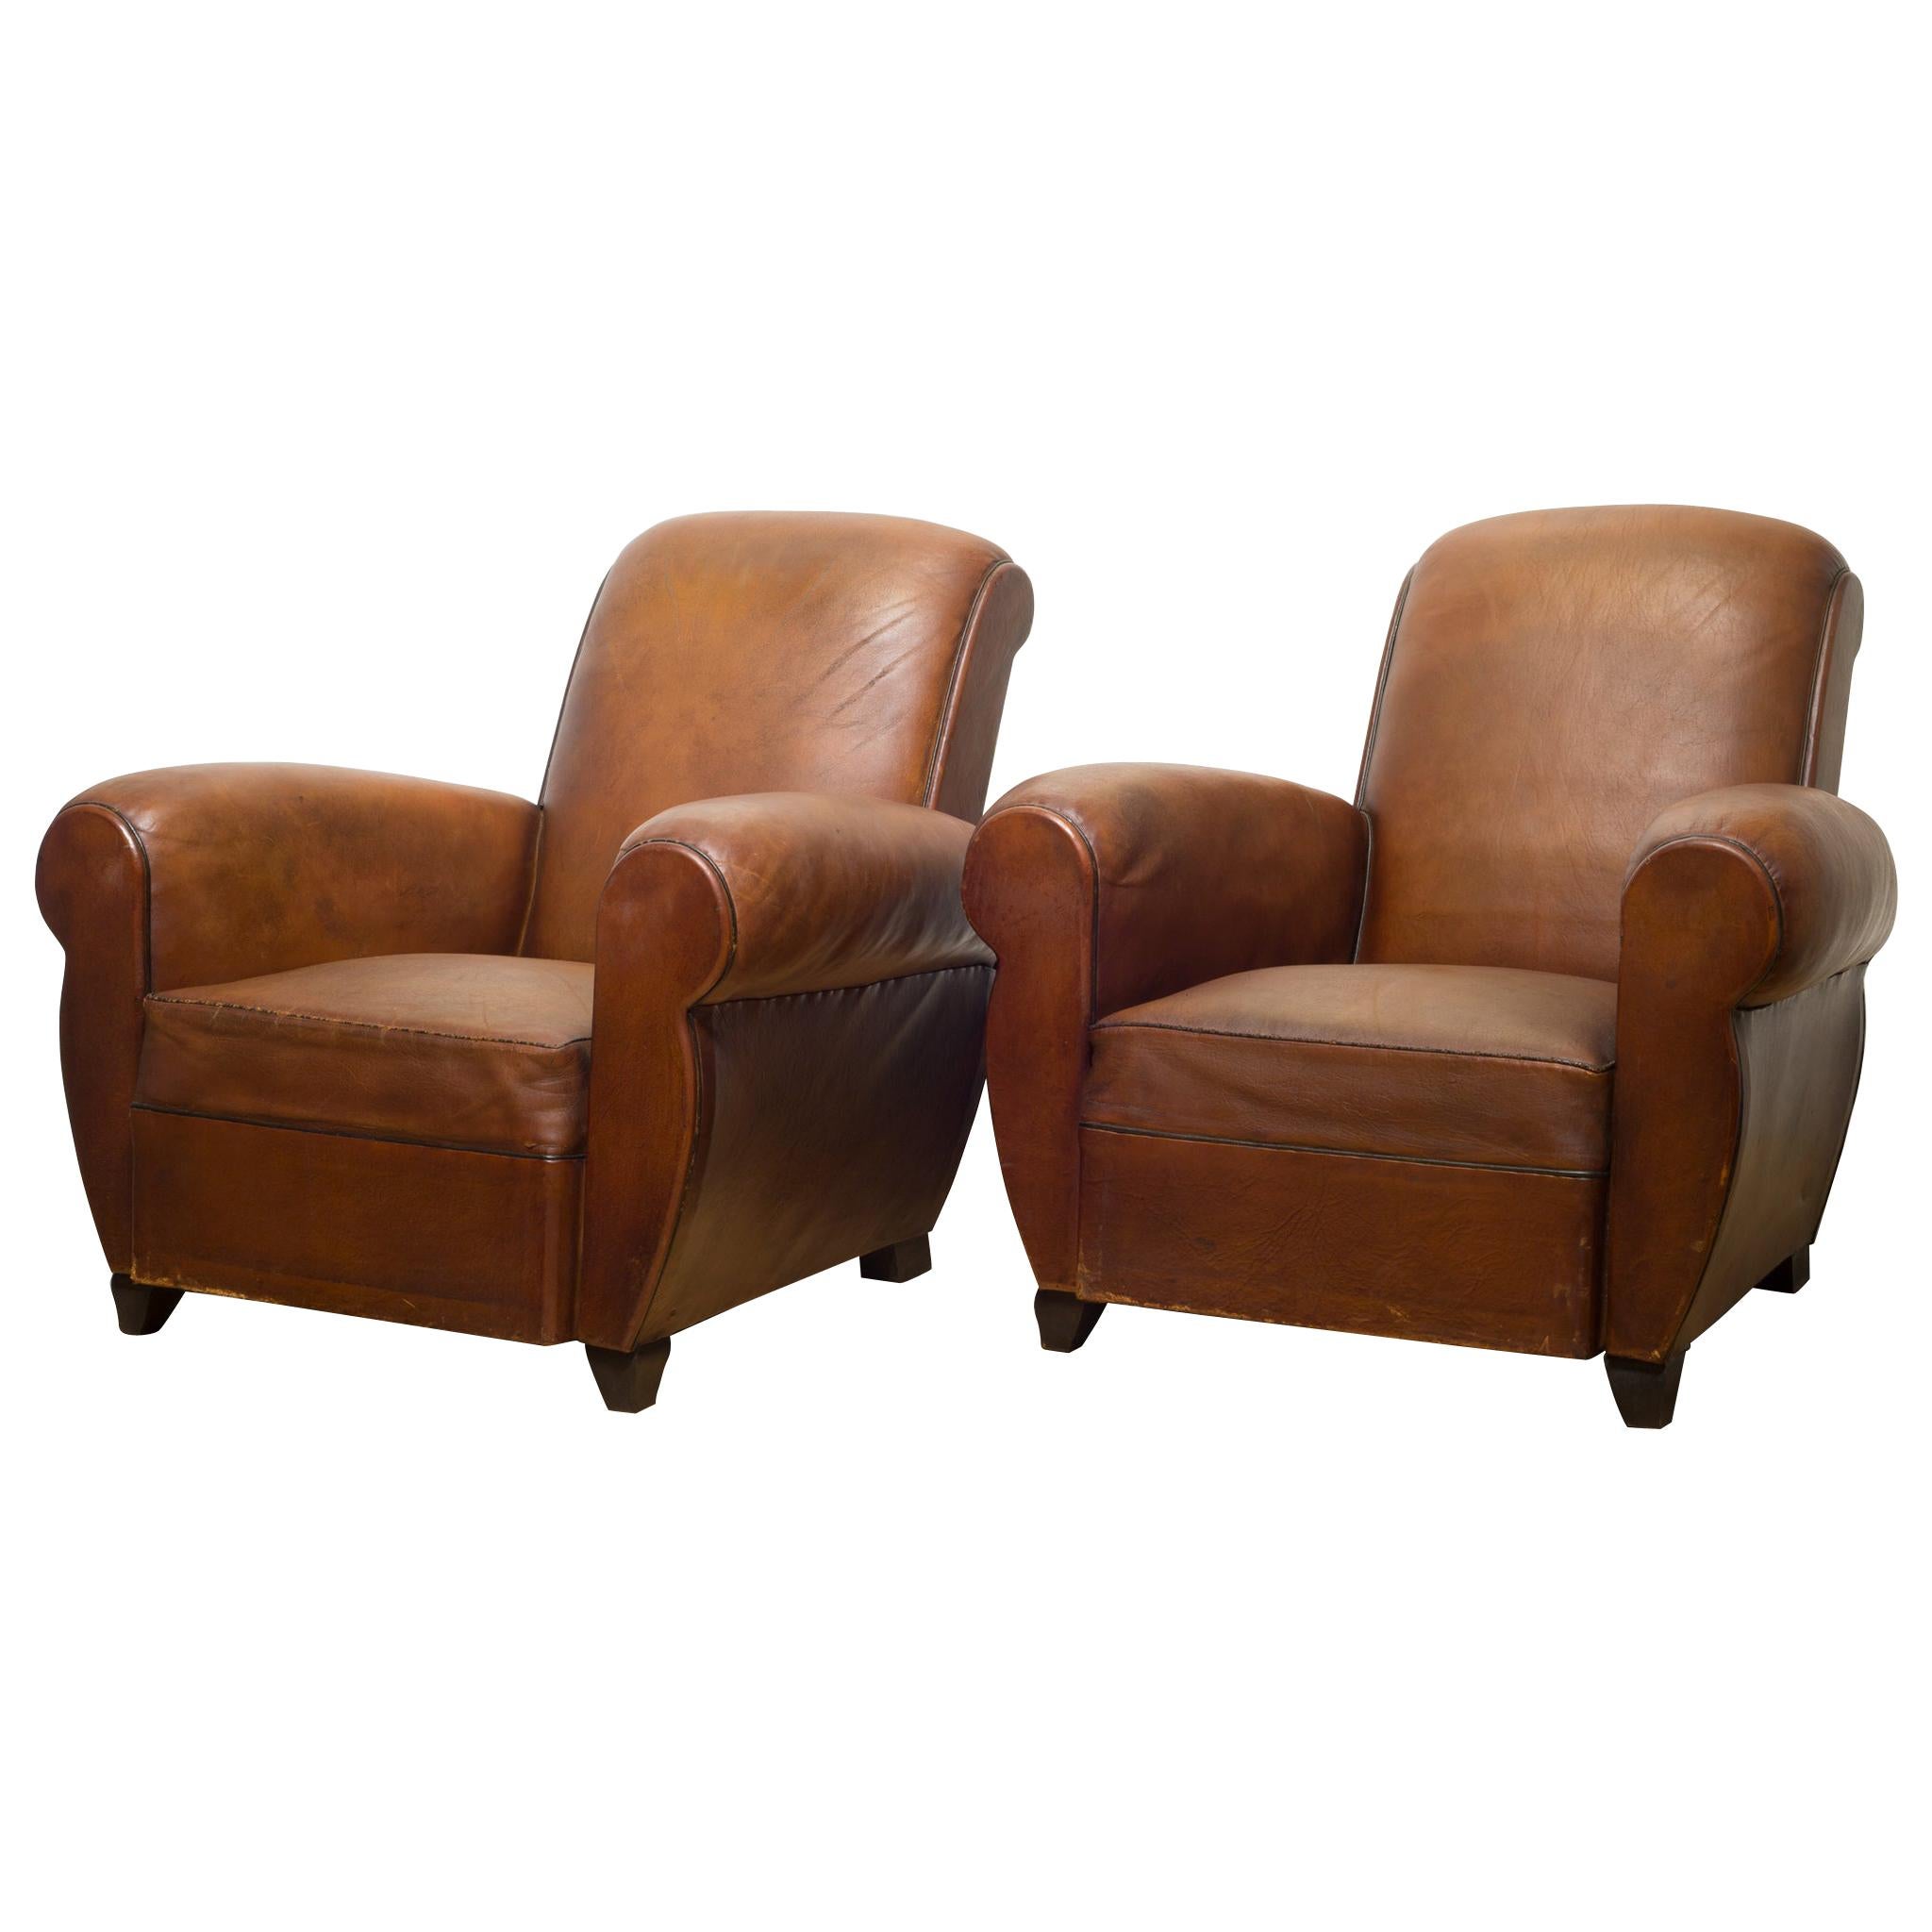 French Sheep Hide Rollback Lounge Chairs, circa 1940